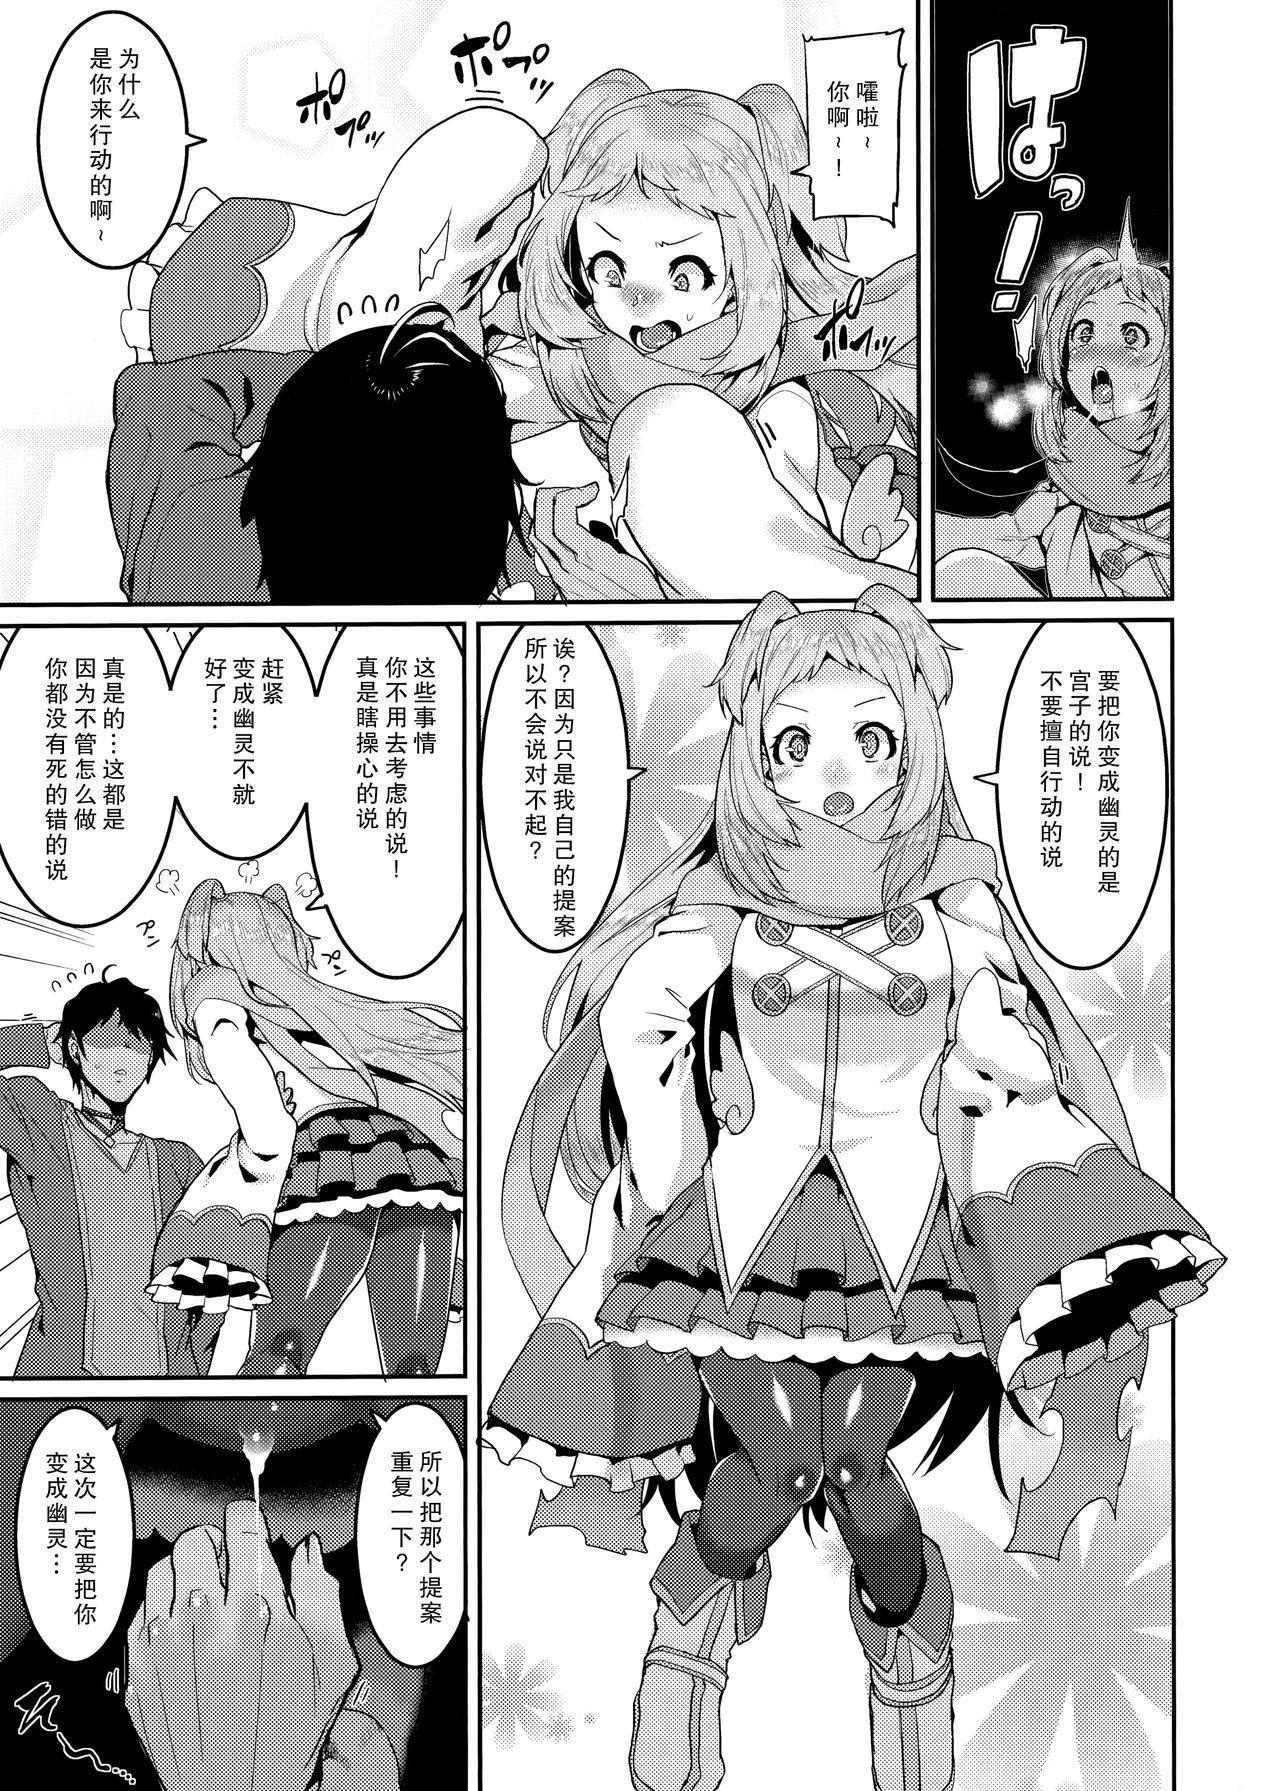 Picked Up (C96) [HBO (Henkuma)] Pudding Switch (Princess Connect! Re:Dive) [Chinese] 【零食汉化组】 - Princess connect Gay Natural - Page 8